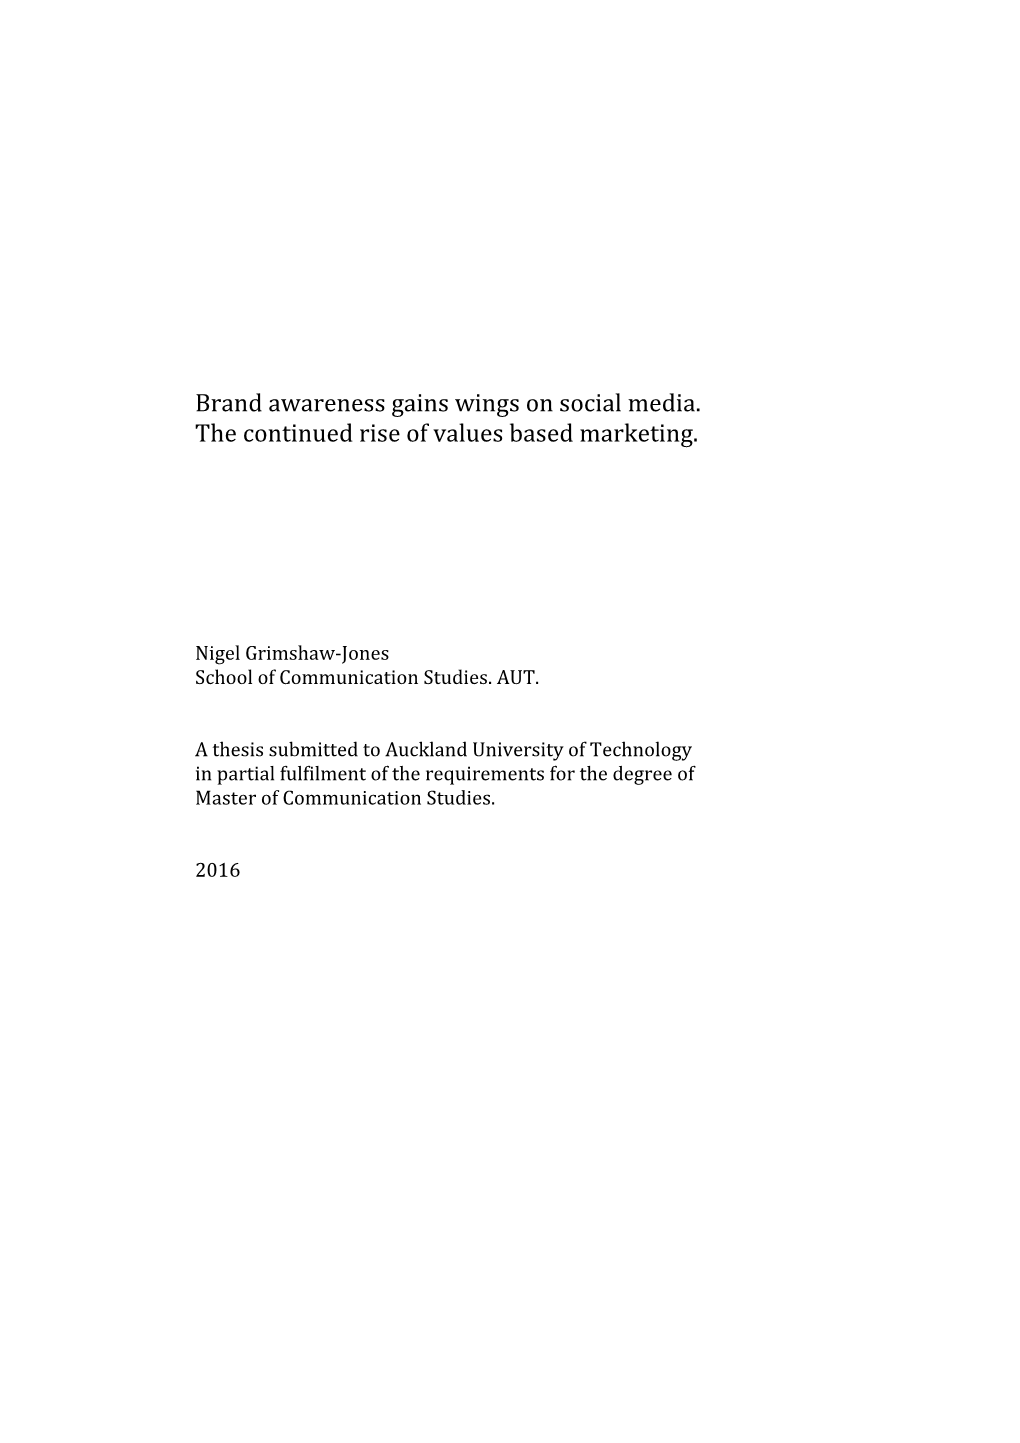 Brand Awareness Gains Wings on Social Media. the Continued Rise of Values Based Marketing